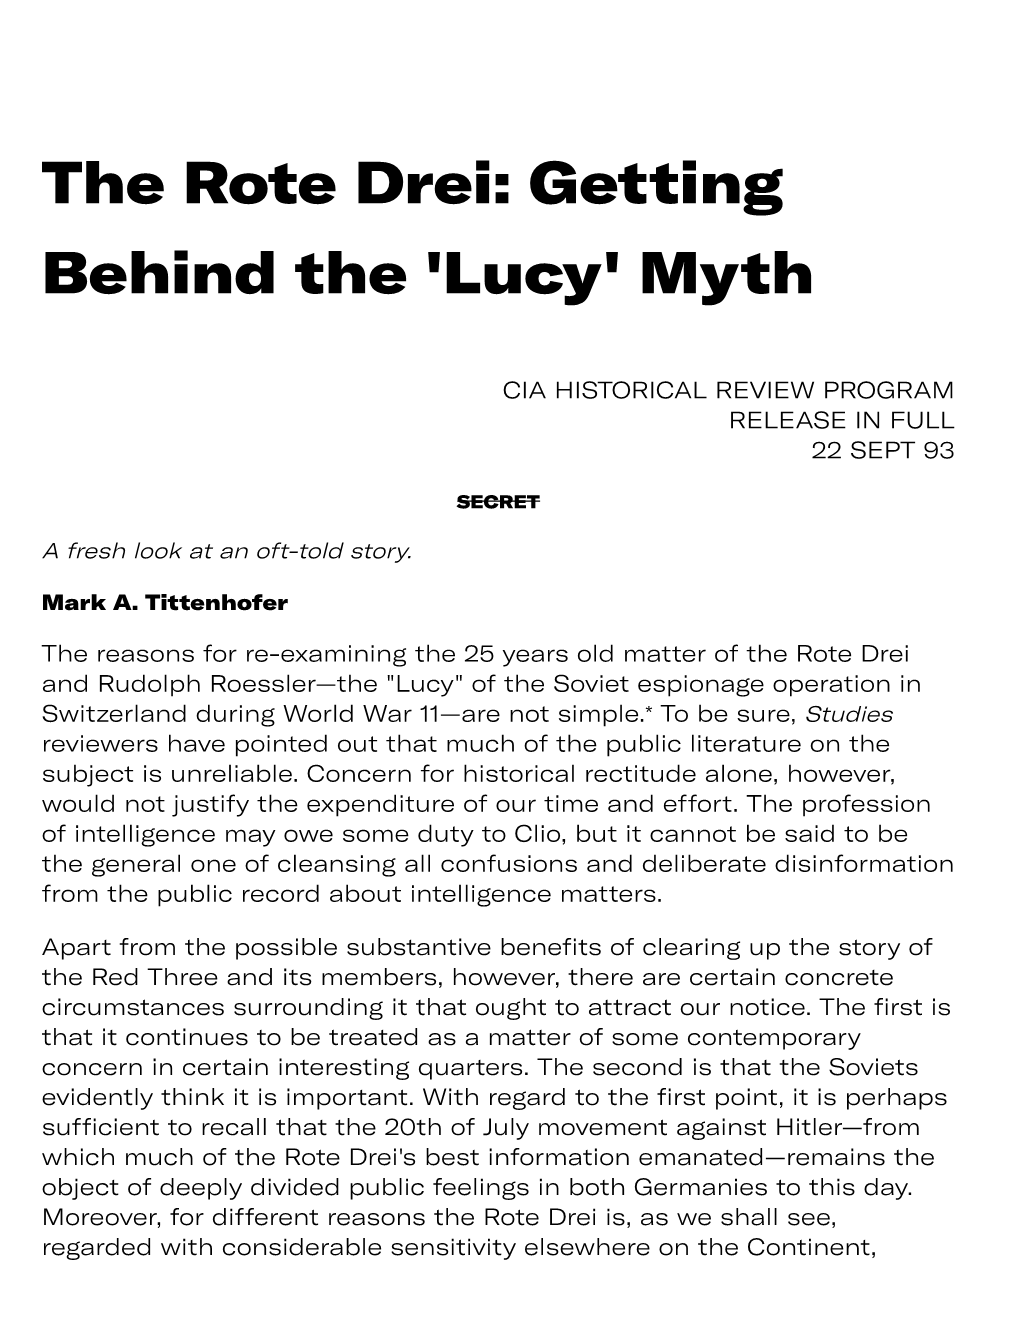 The Rote Drei: Getting Behind the 'Lucy' Myth